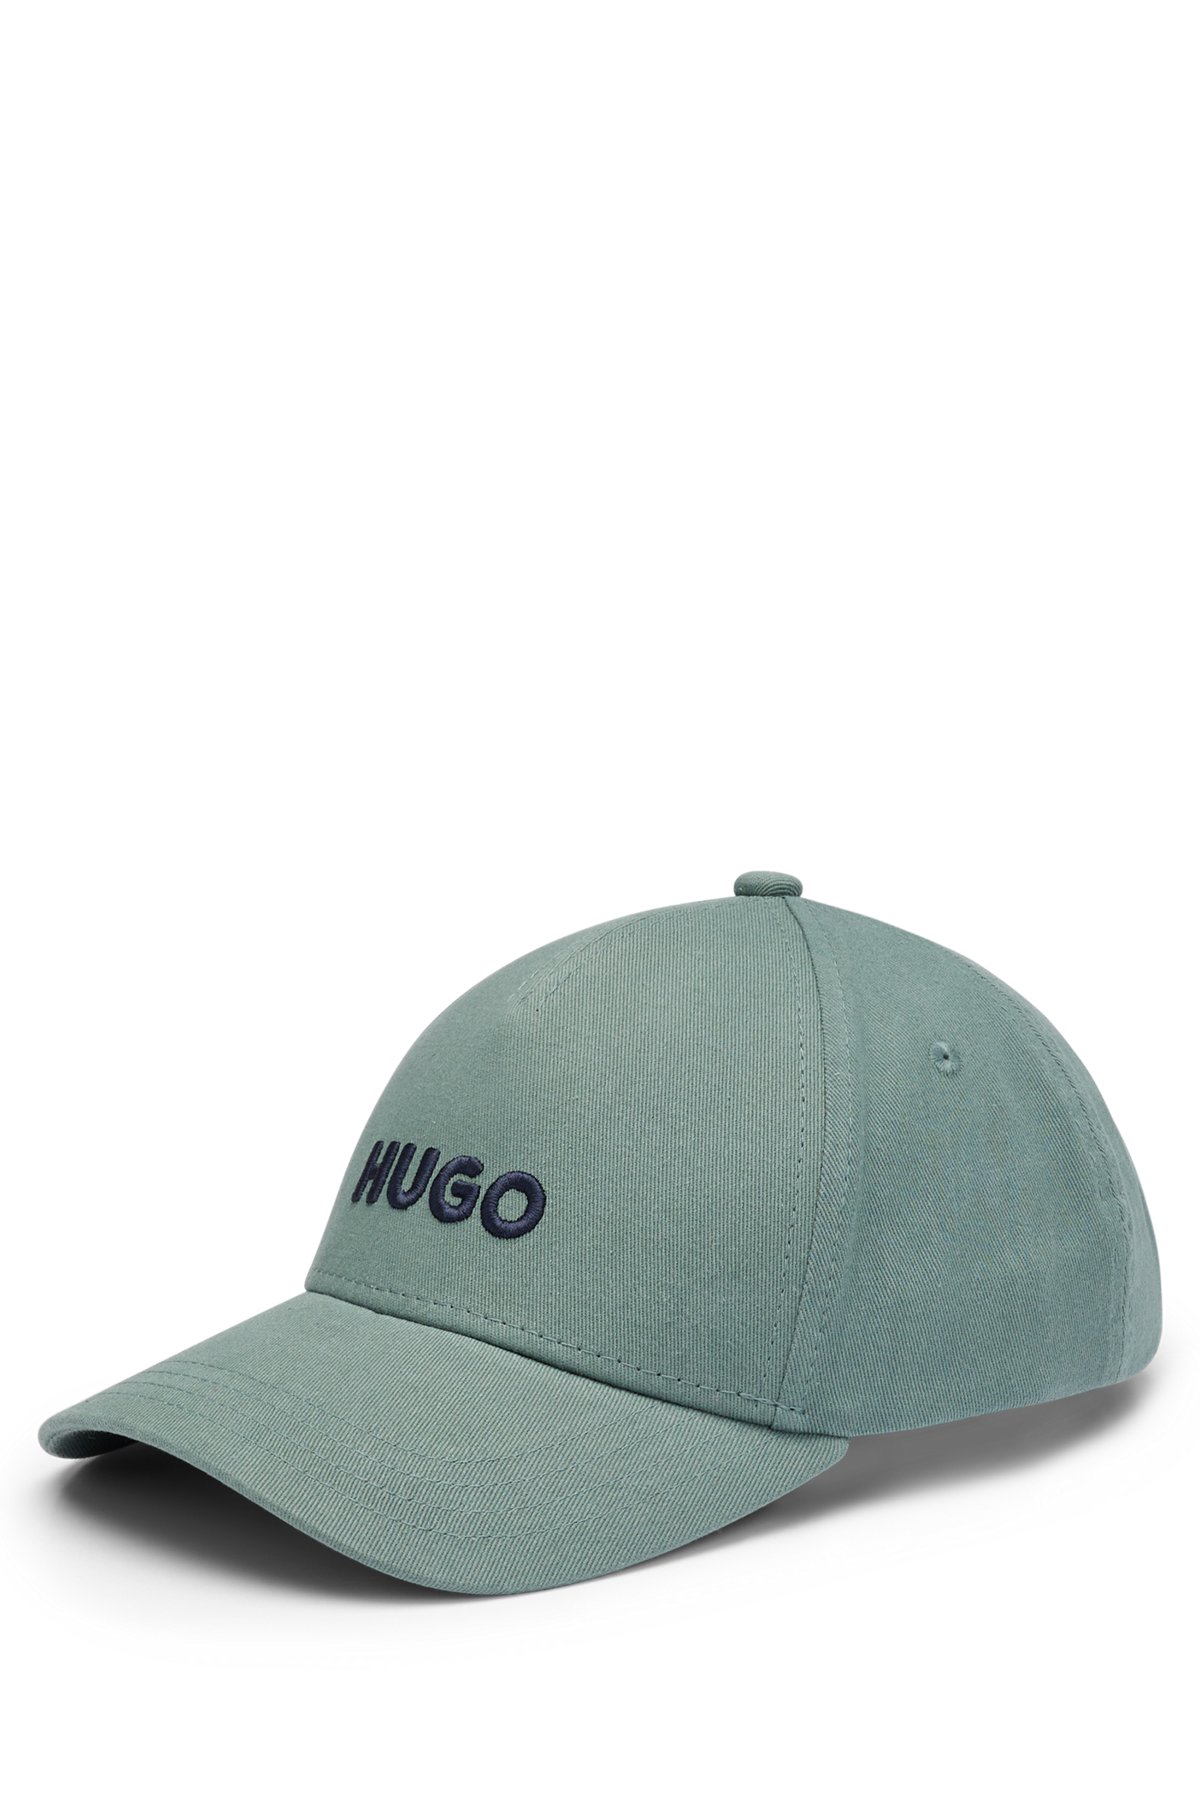 HUGO - Cotton-twill cap with embroidered logo and snap closure